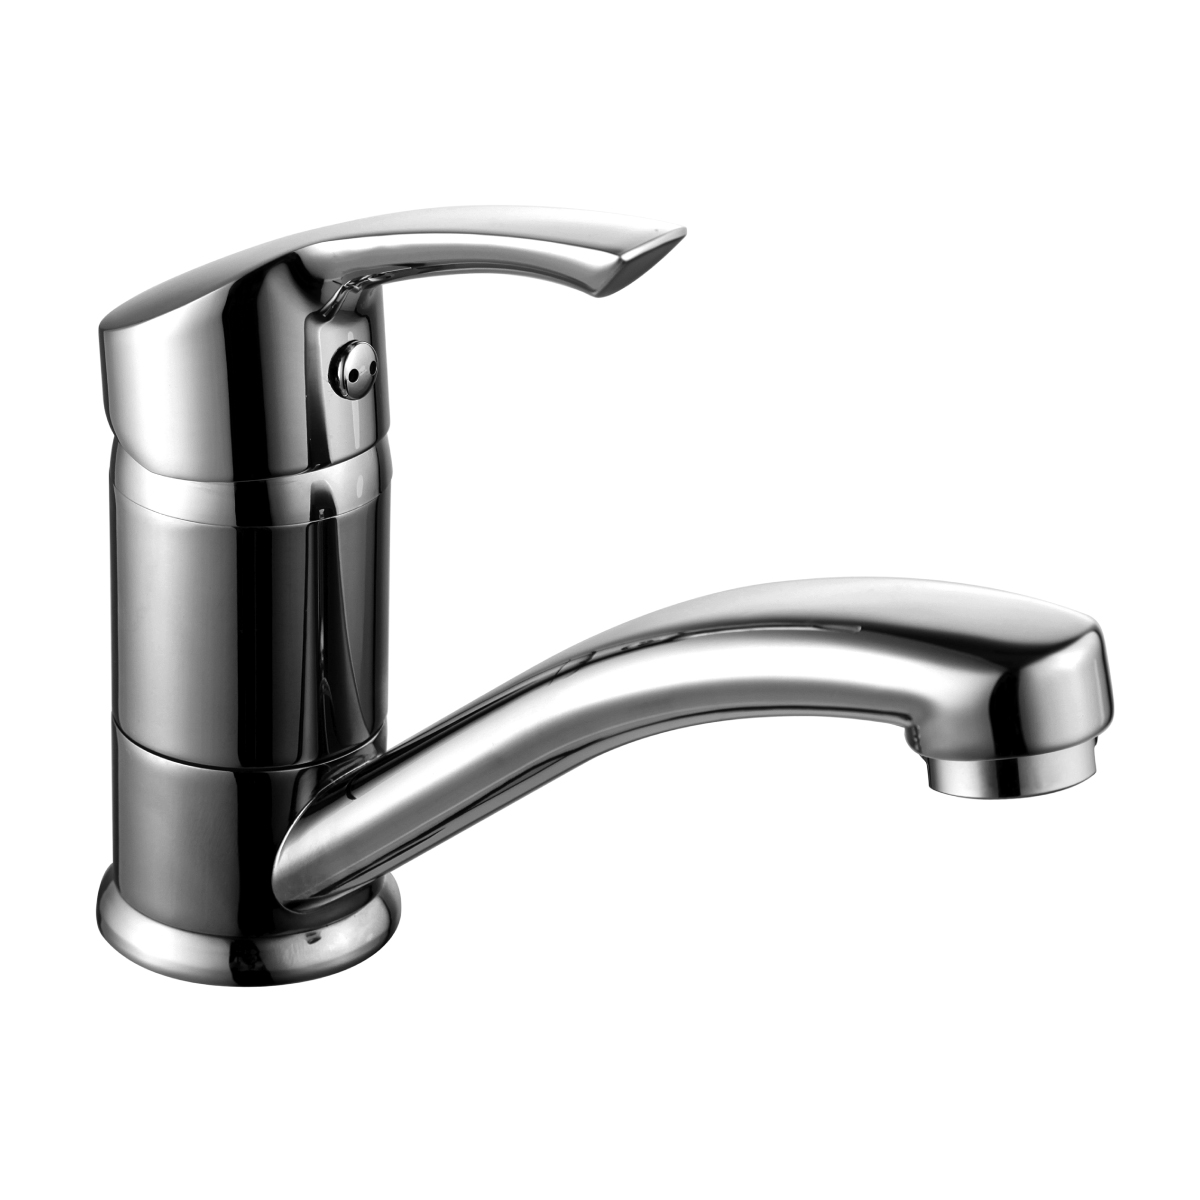 LM1107C Washbasin faucet
with swivel spout